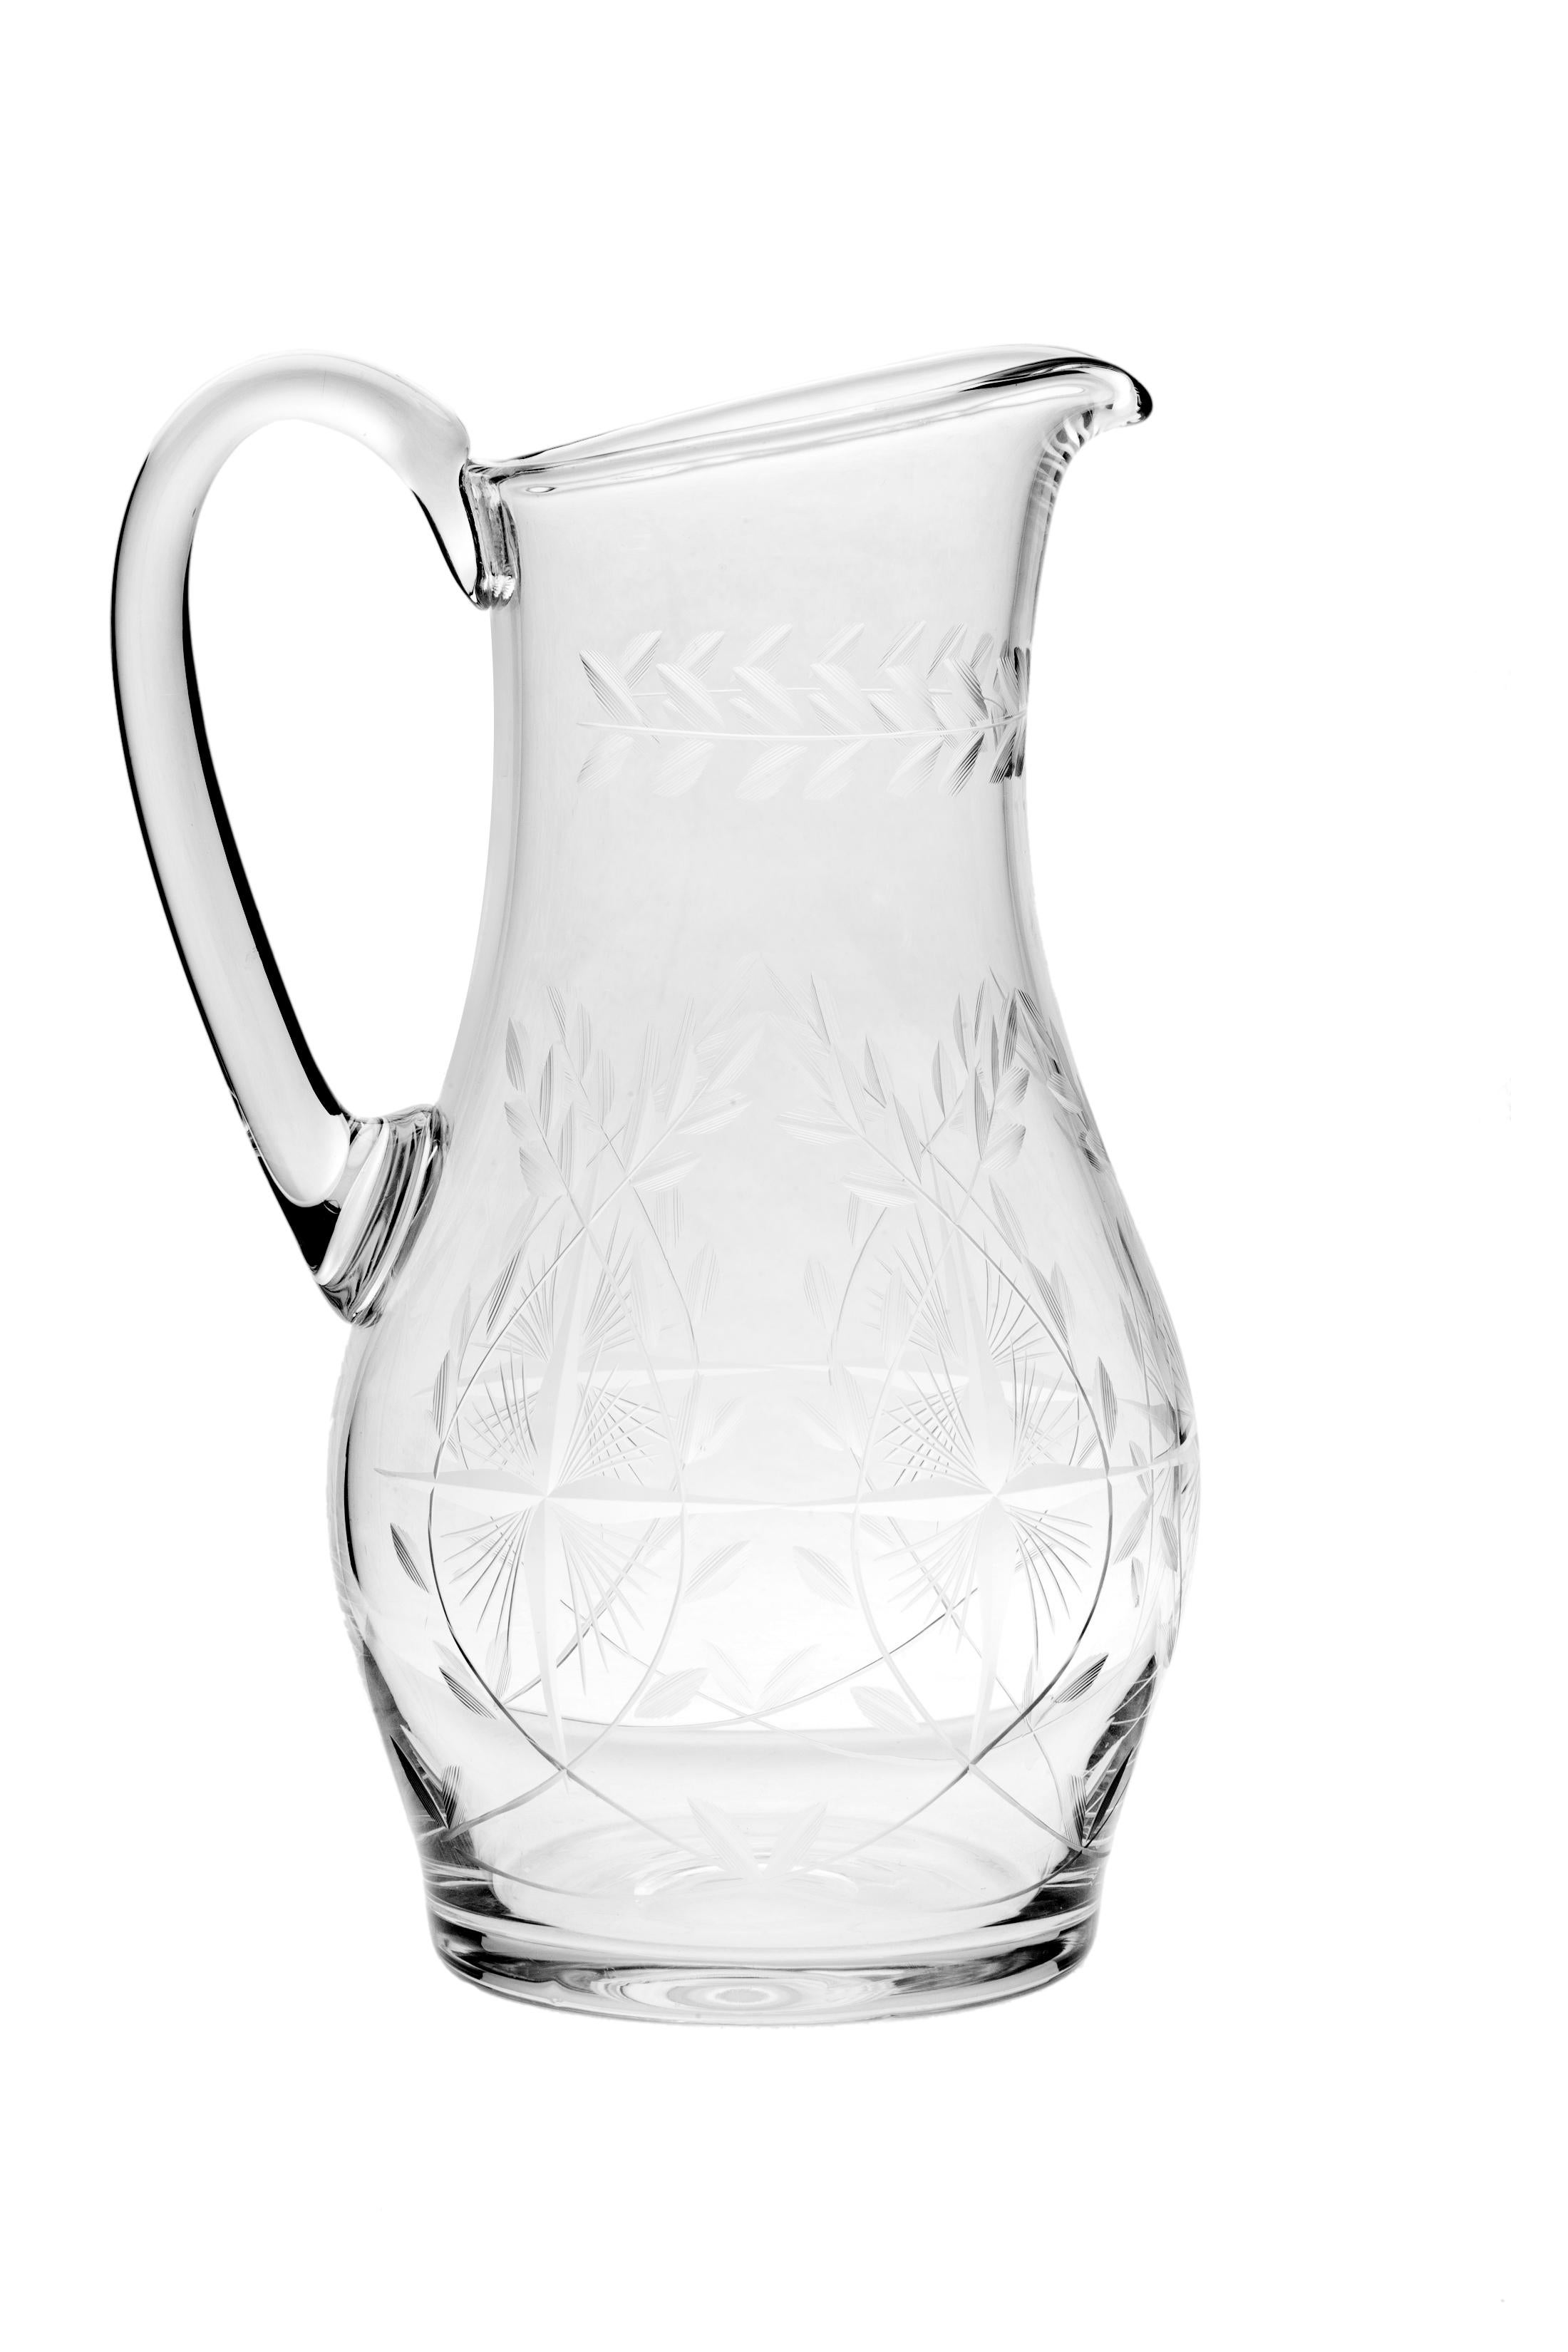 An exceptionally fine hand cut crystal pitcher. This pretty pitcher has a garland of leaves circling the neck and a criss-cross cut pattern with etched swaying leaves at the base. Perfect for water, juice or Bloody Mary’s at brunch. A well balanced